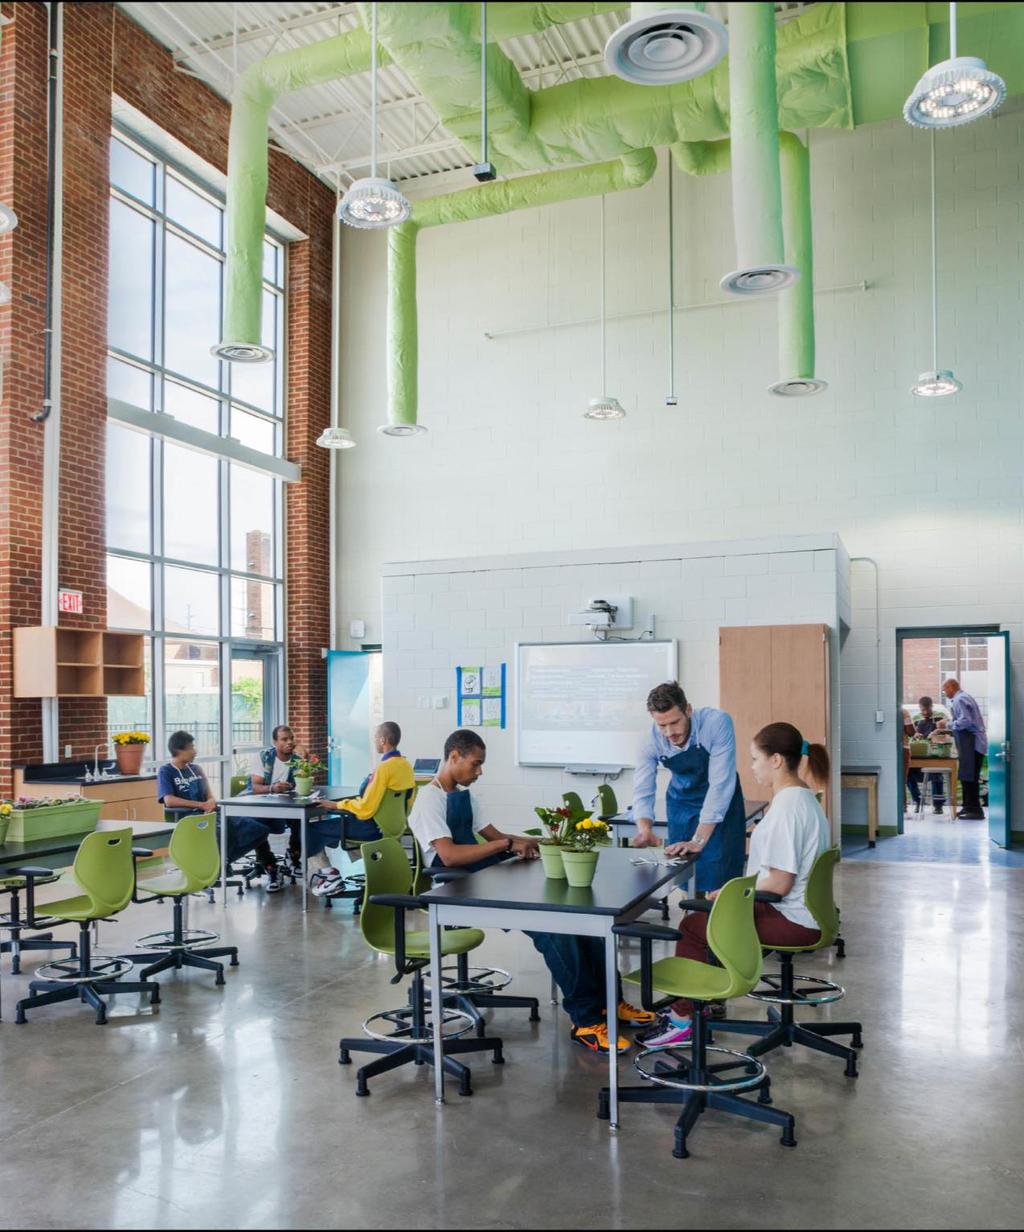 FOCUSED ON LIFE-LONG SUCCESS Learning Environment: The learning environment at River Terrace supports a curriculum designed to prepare all students for productive lives.